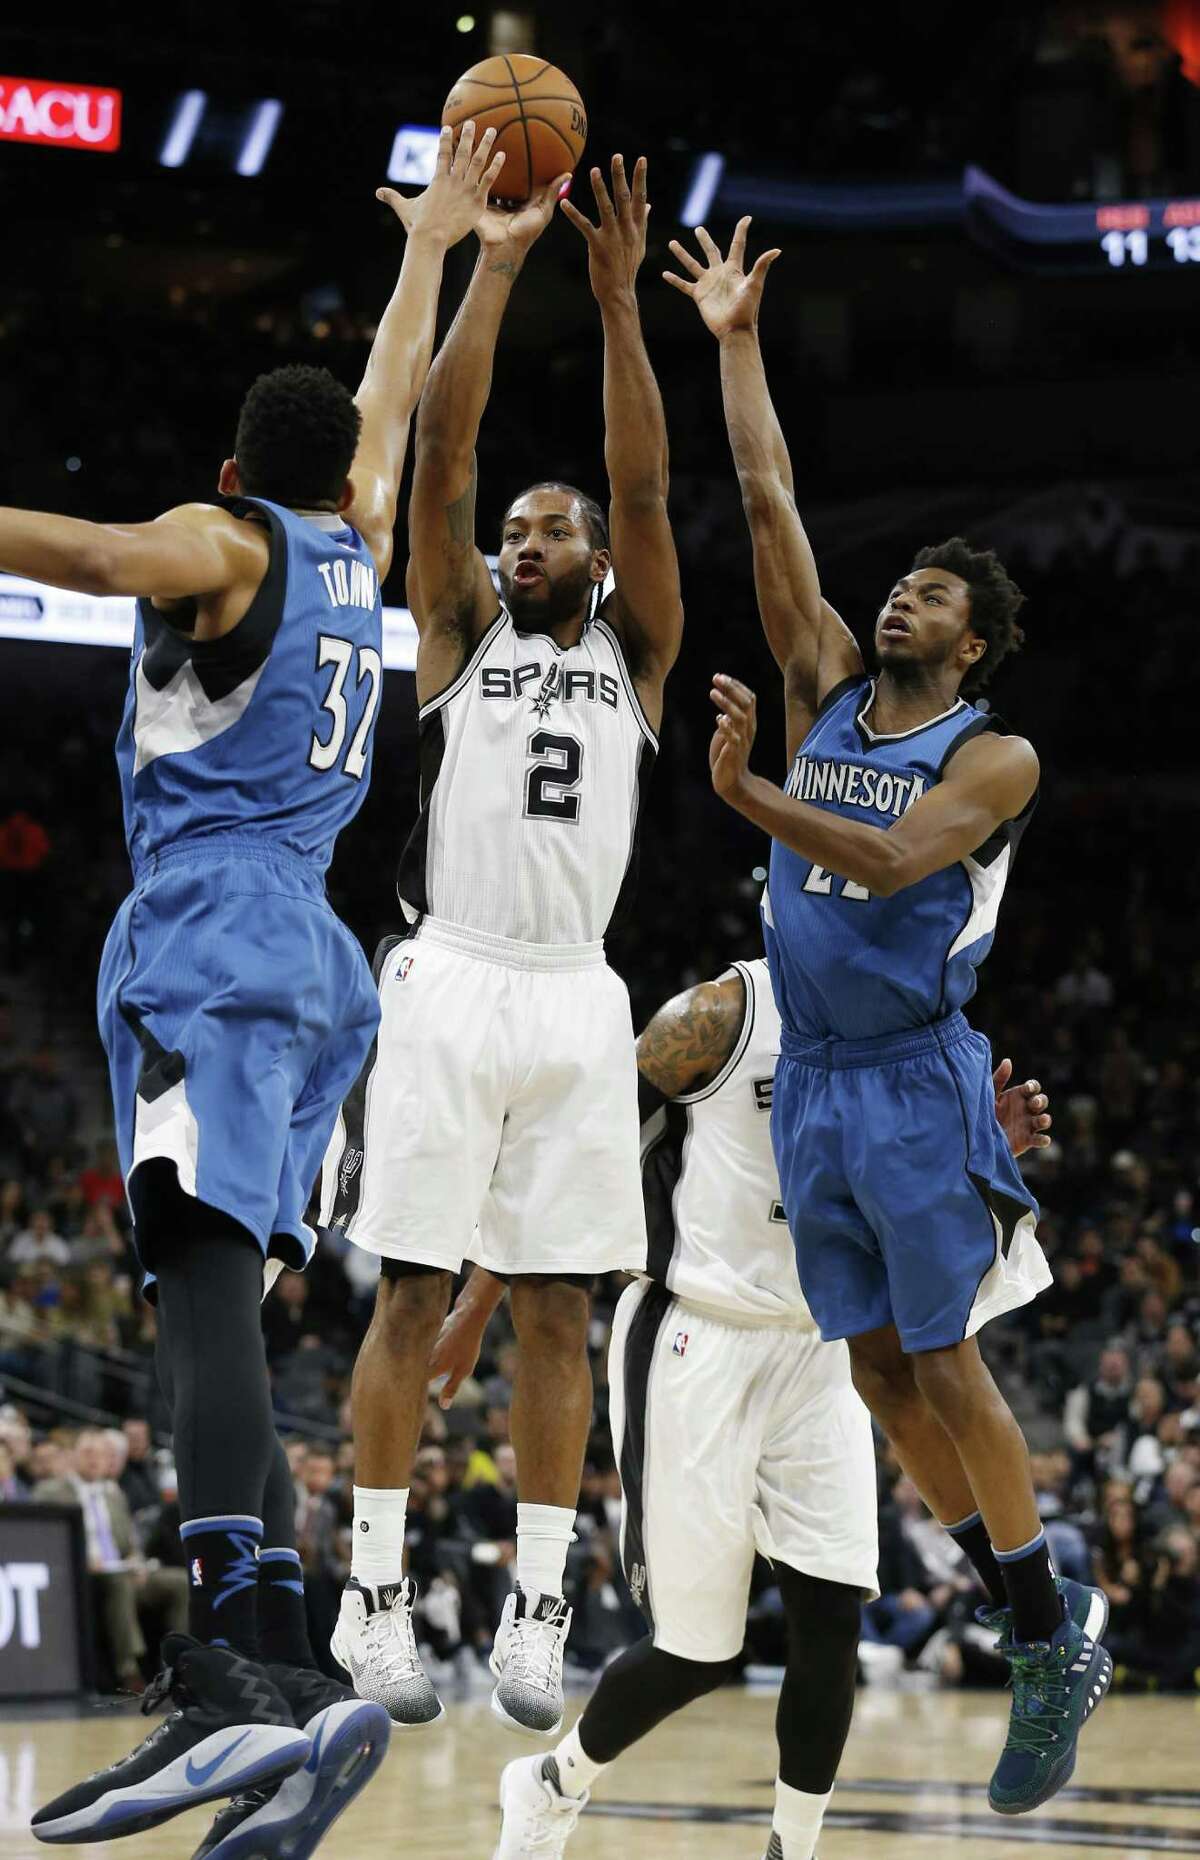 Spurs' Kawhi Leonard (02) scores against Minnesota Timberwolves' Karl-Anthony Towns (32) and Andrew Wiggins (22) during their game at the AT&T Center on Tuesday, Jan. 17, 2017. (Kin Man Hui/San Antonio Express-News)